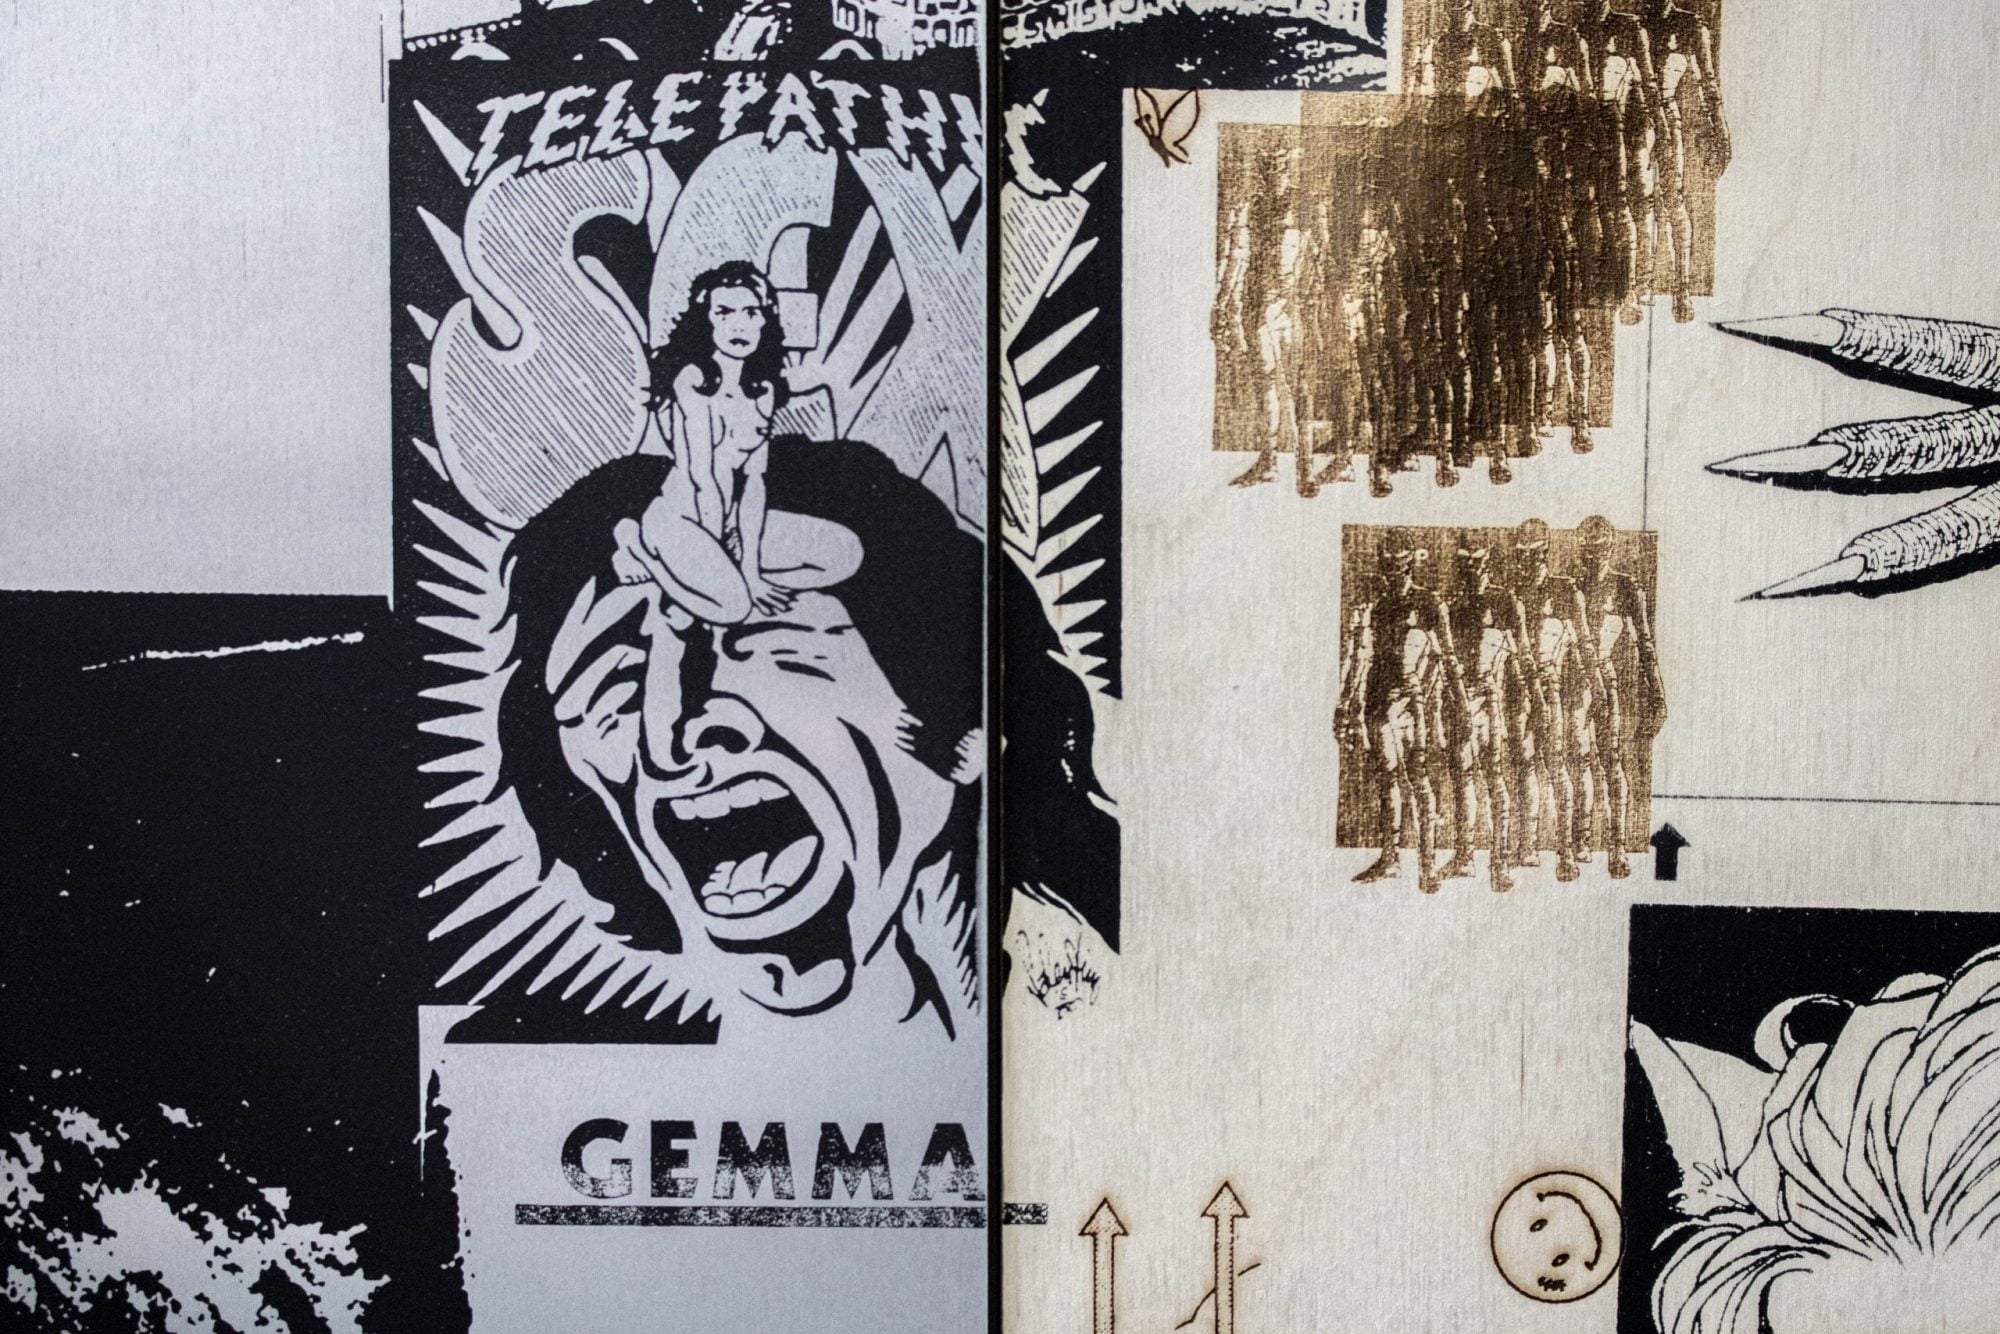 A black line divides the two halves of the image. On a grey background, a printed image in black of a figure with a naked woman sitting on their forehead is partially covering the surface. The words “Telepathic”, “Gemma” and “Sex” fill the left hand side. On the right, on a beige textured background, brown engravings of comic book heroes overlap and miscellaneous pop culture icons and kitsch designs are dotted about. Crops of images are partially visible around the edges.